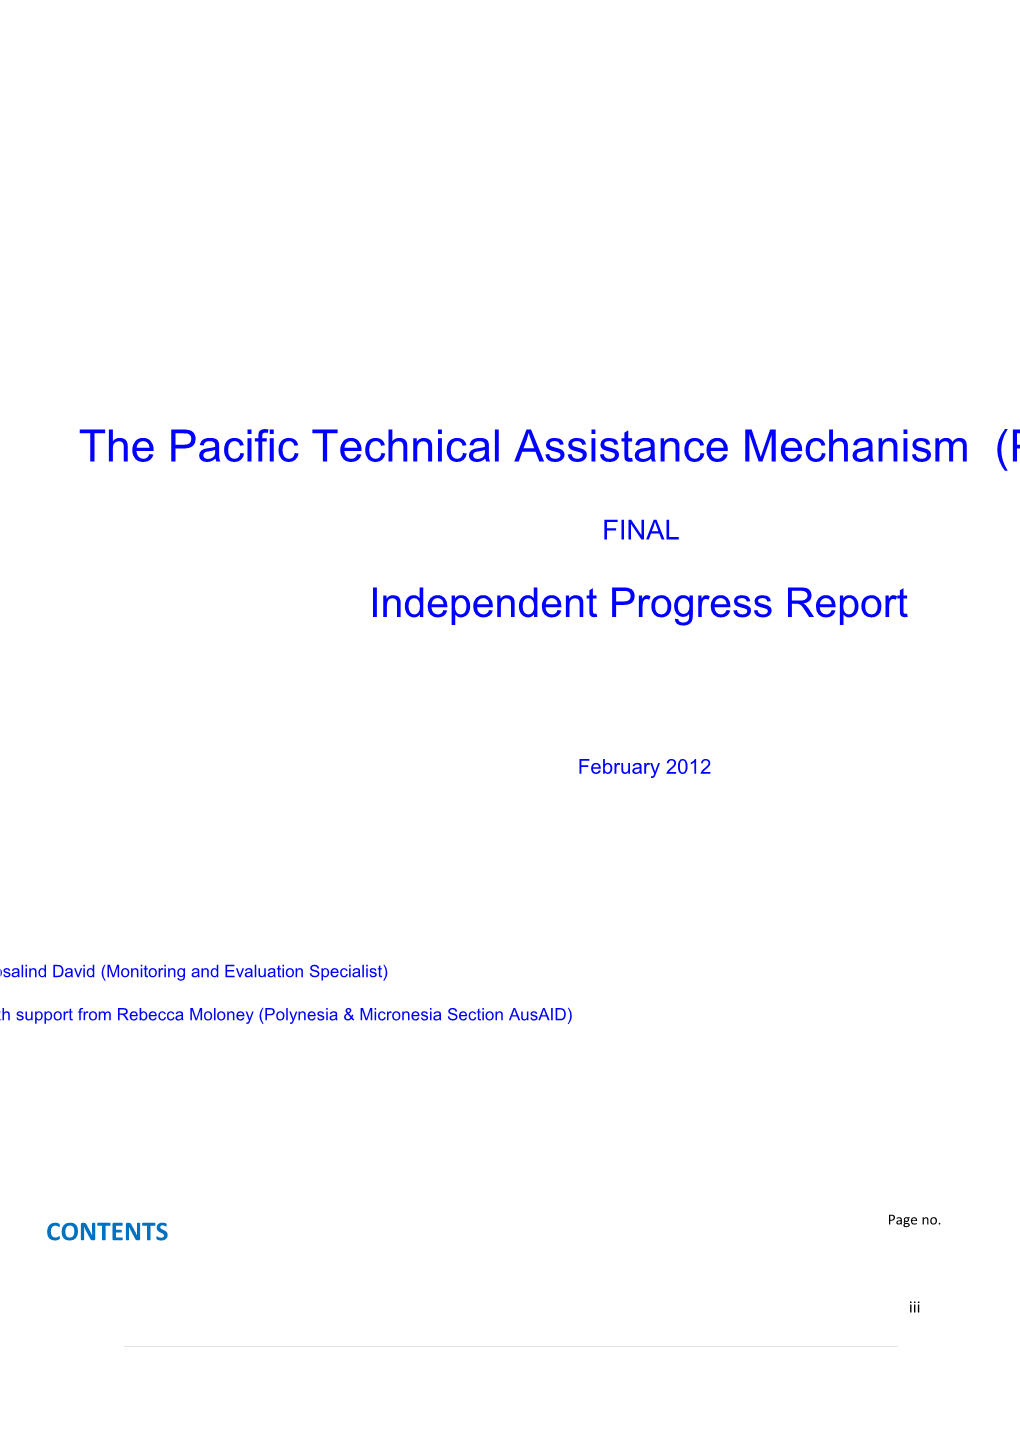 Independent Review of PACTAM 2011